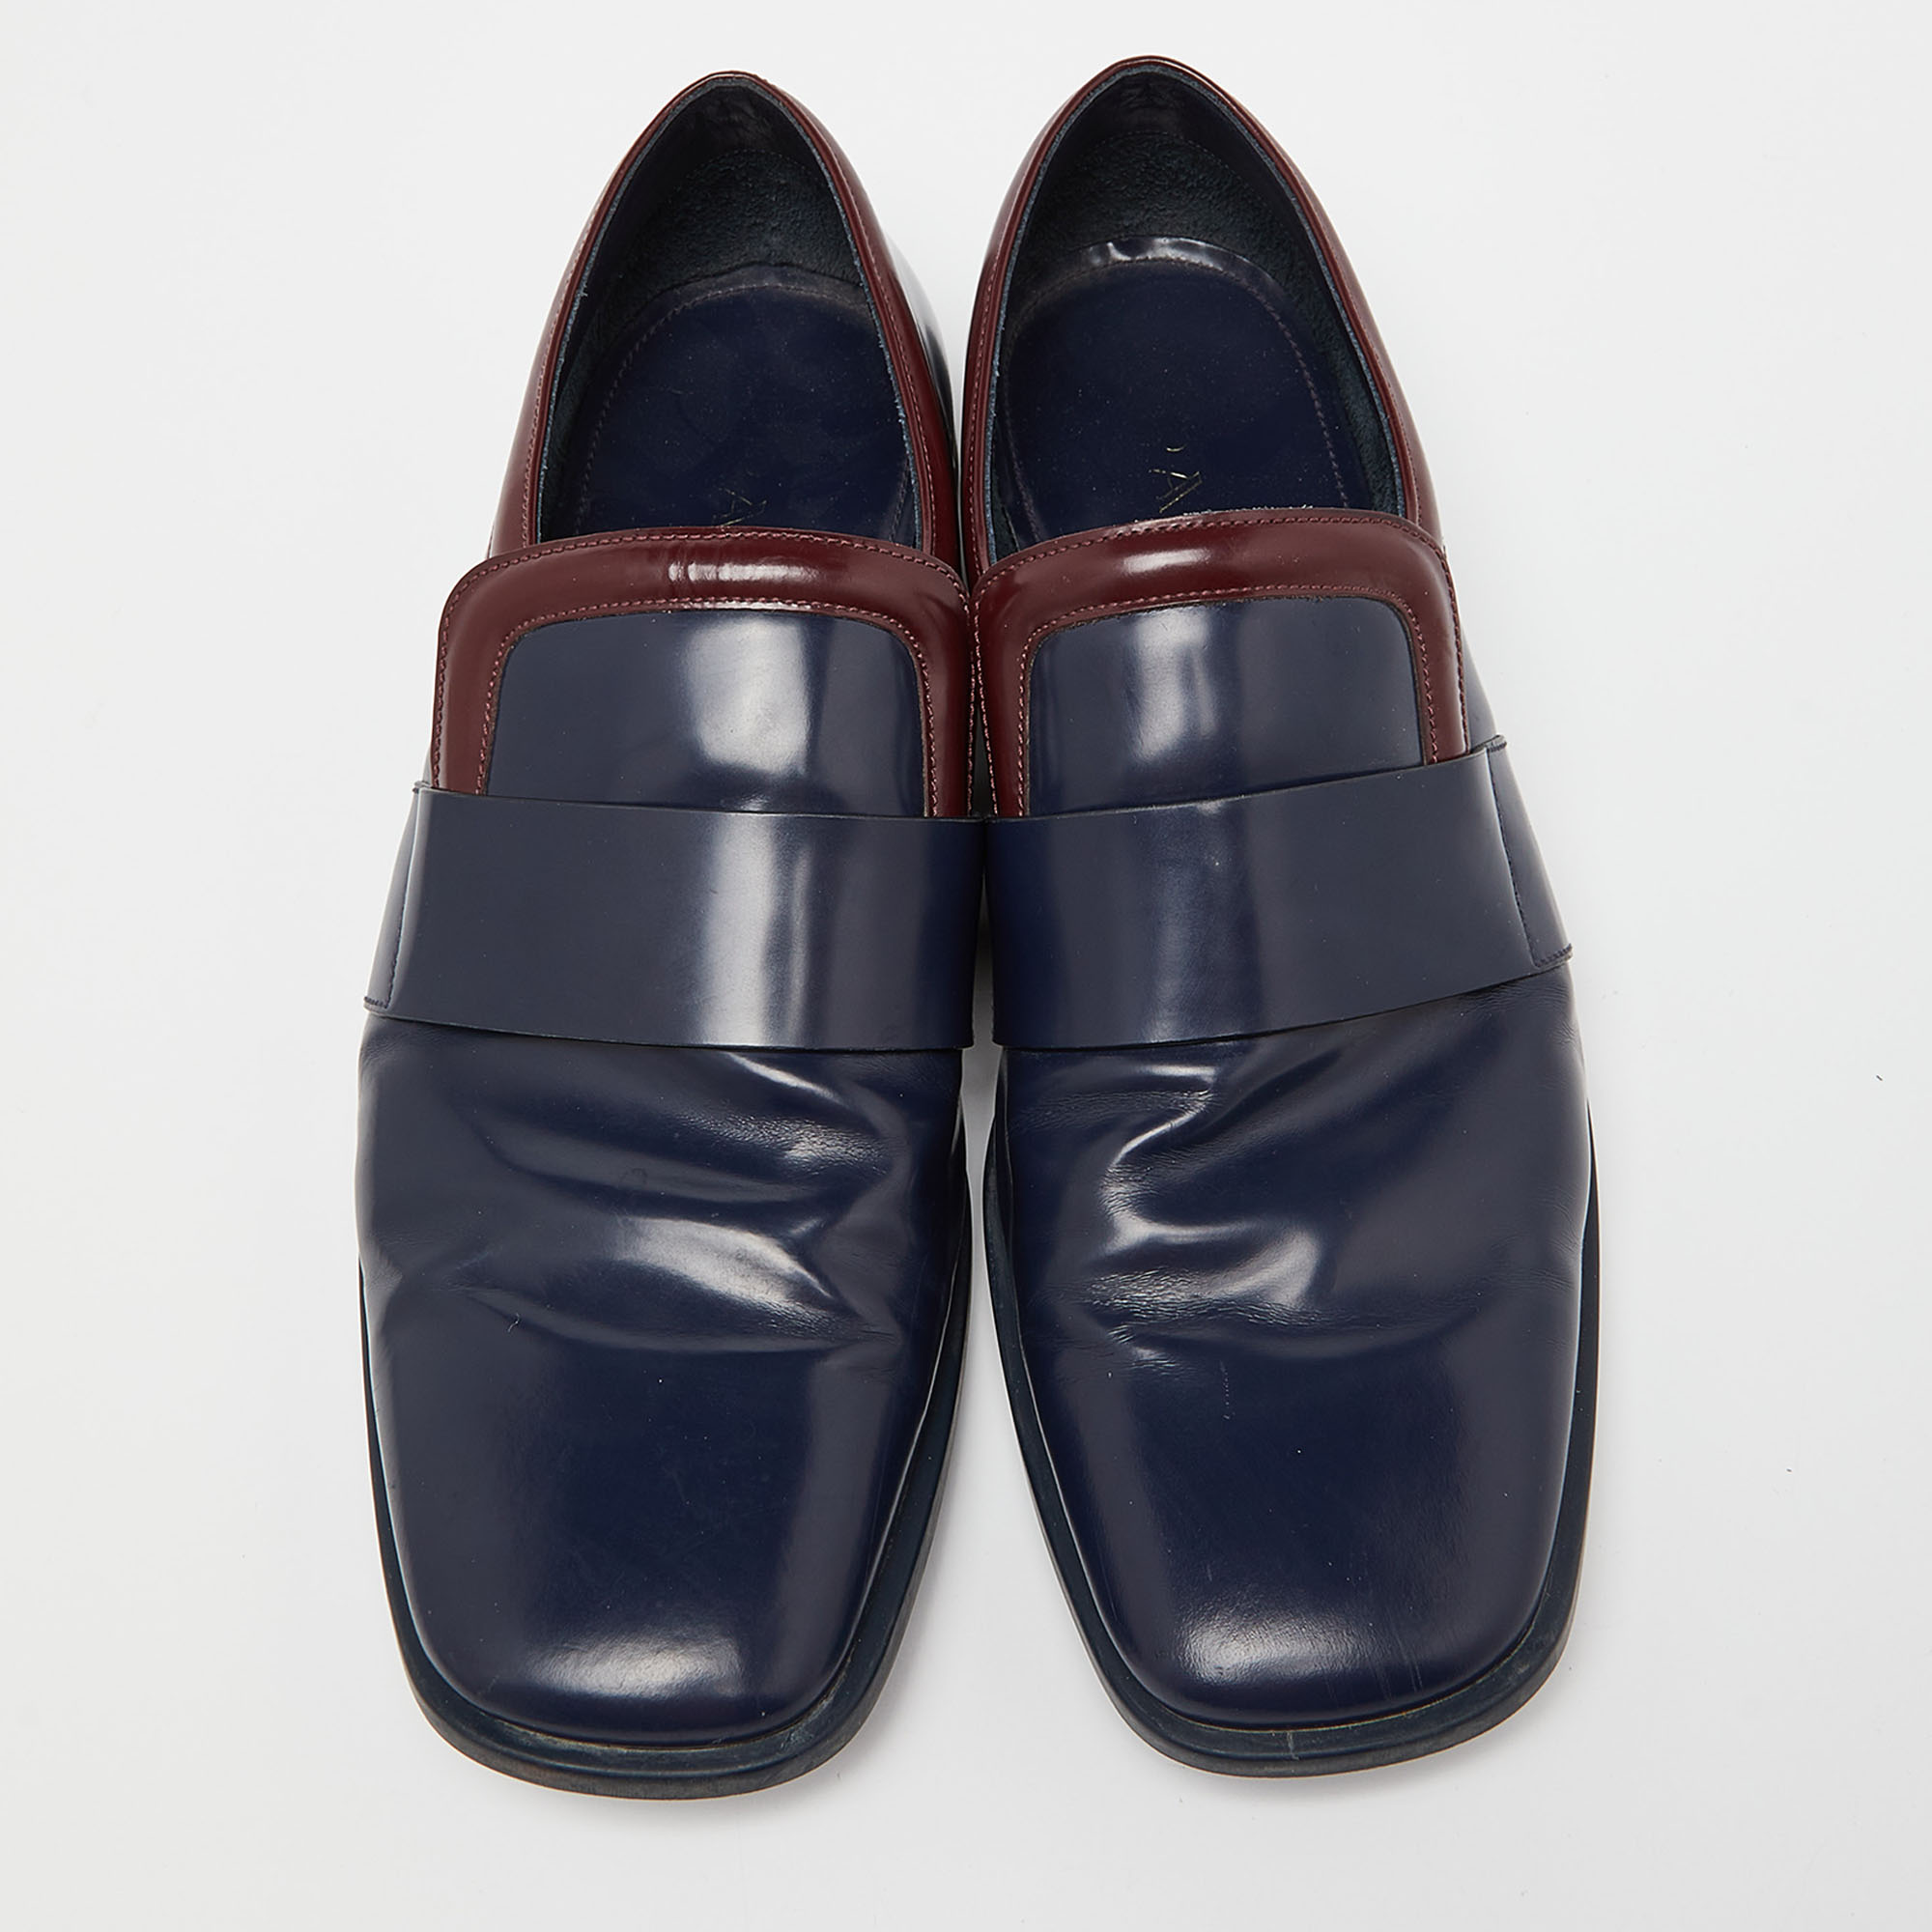 Prada Navy Blue Leather Square Toe Loafers Size 43.5